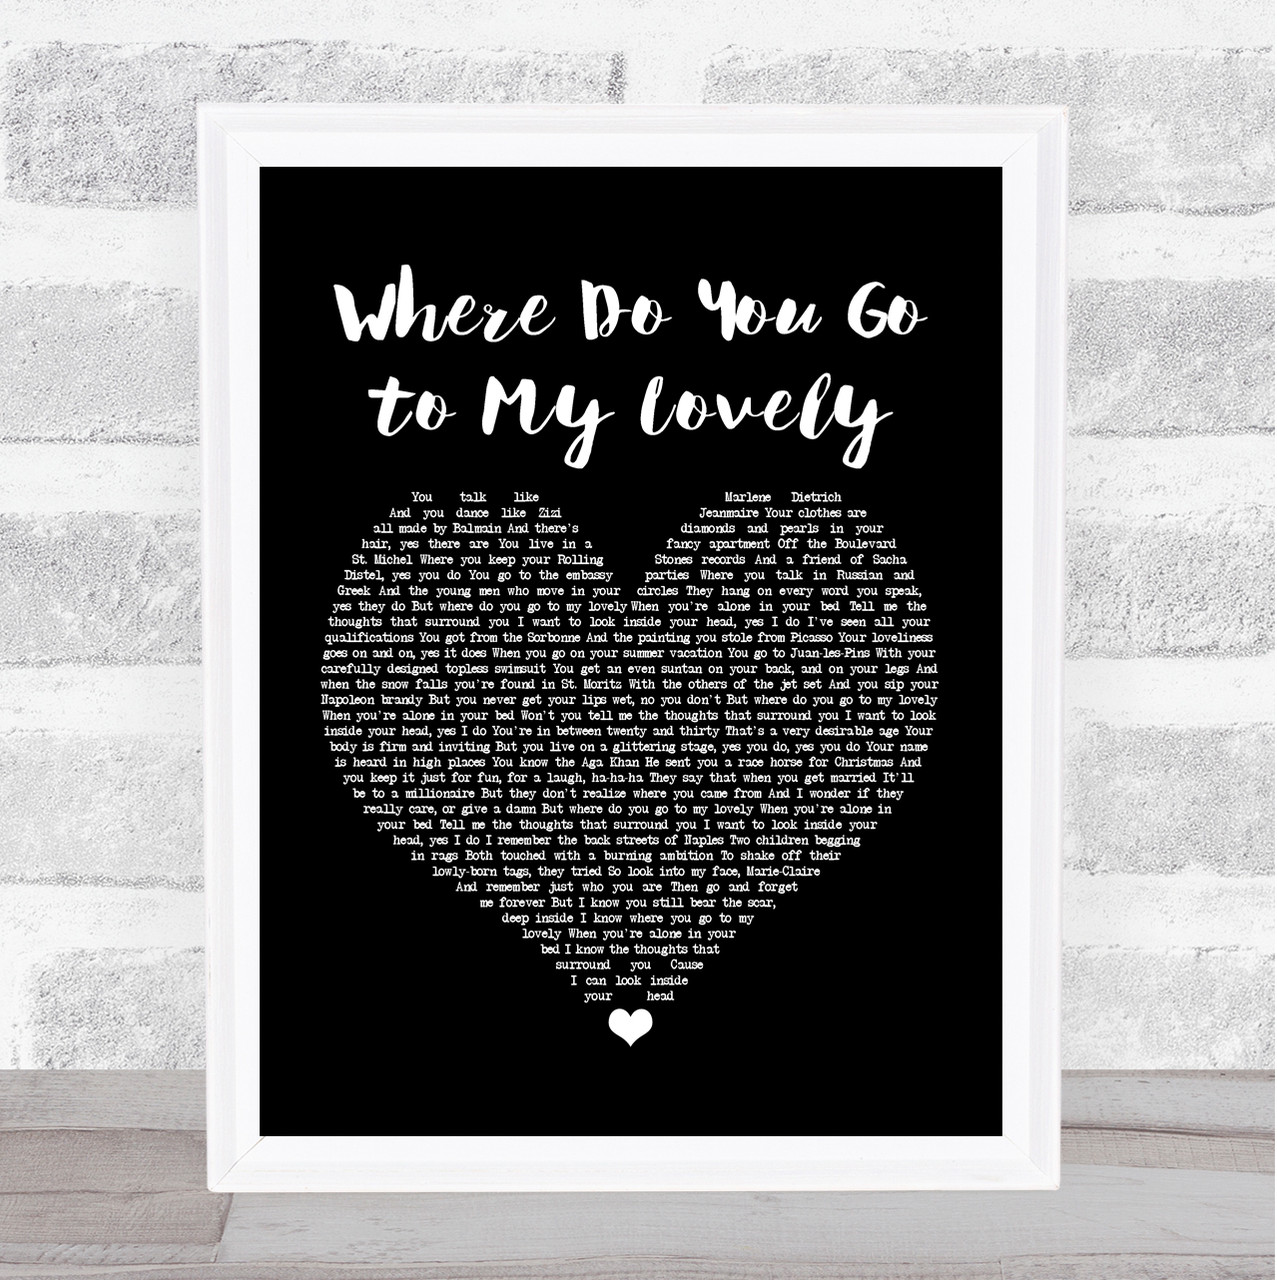 Where Do You Go To (My Lovely) - song and lyrics by Peter Sarstedt